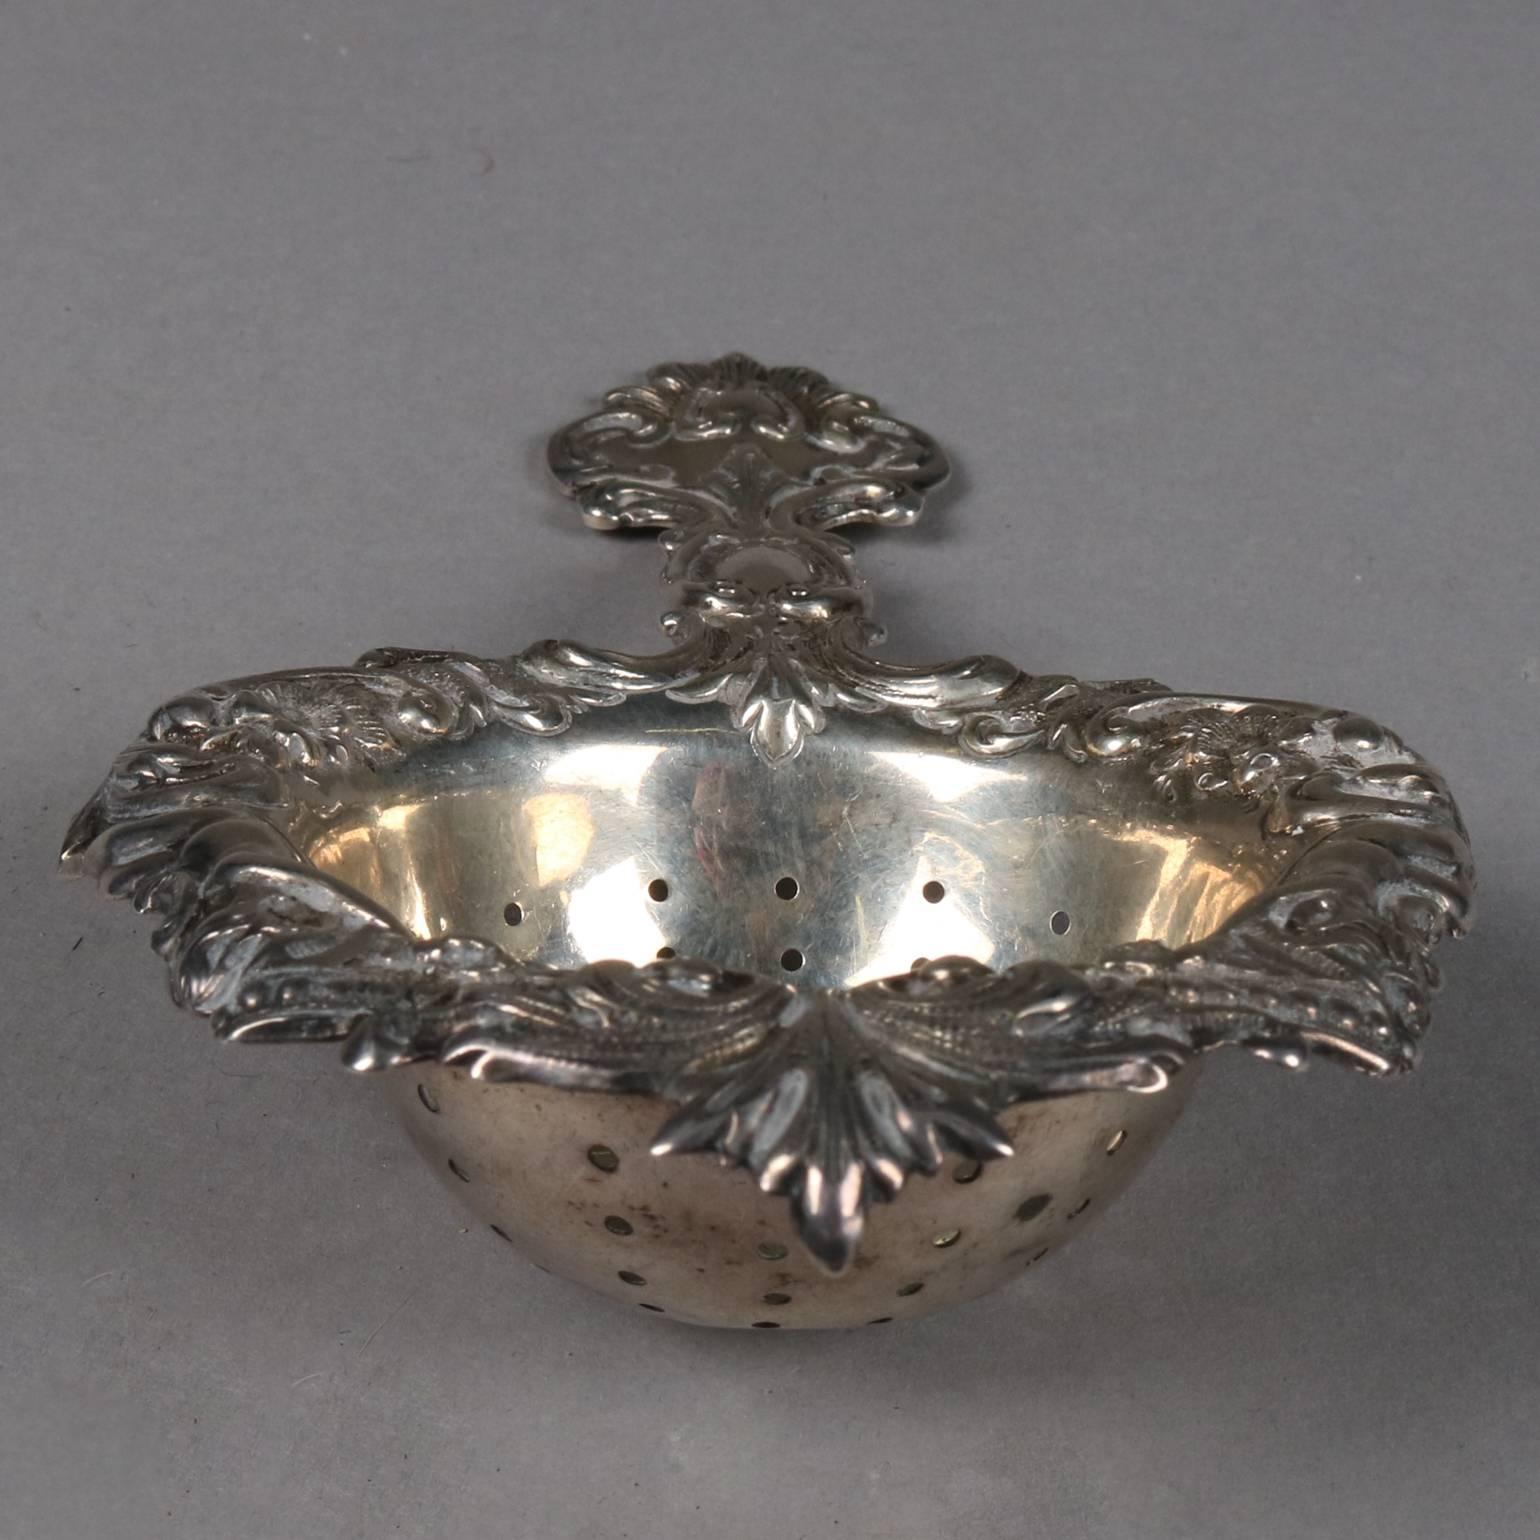 American Antique Howard & Co. Sterling Silver Figural Strainer with Cherub, 18th Century